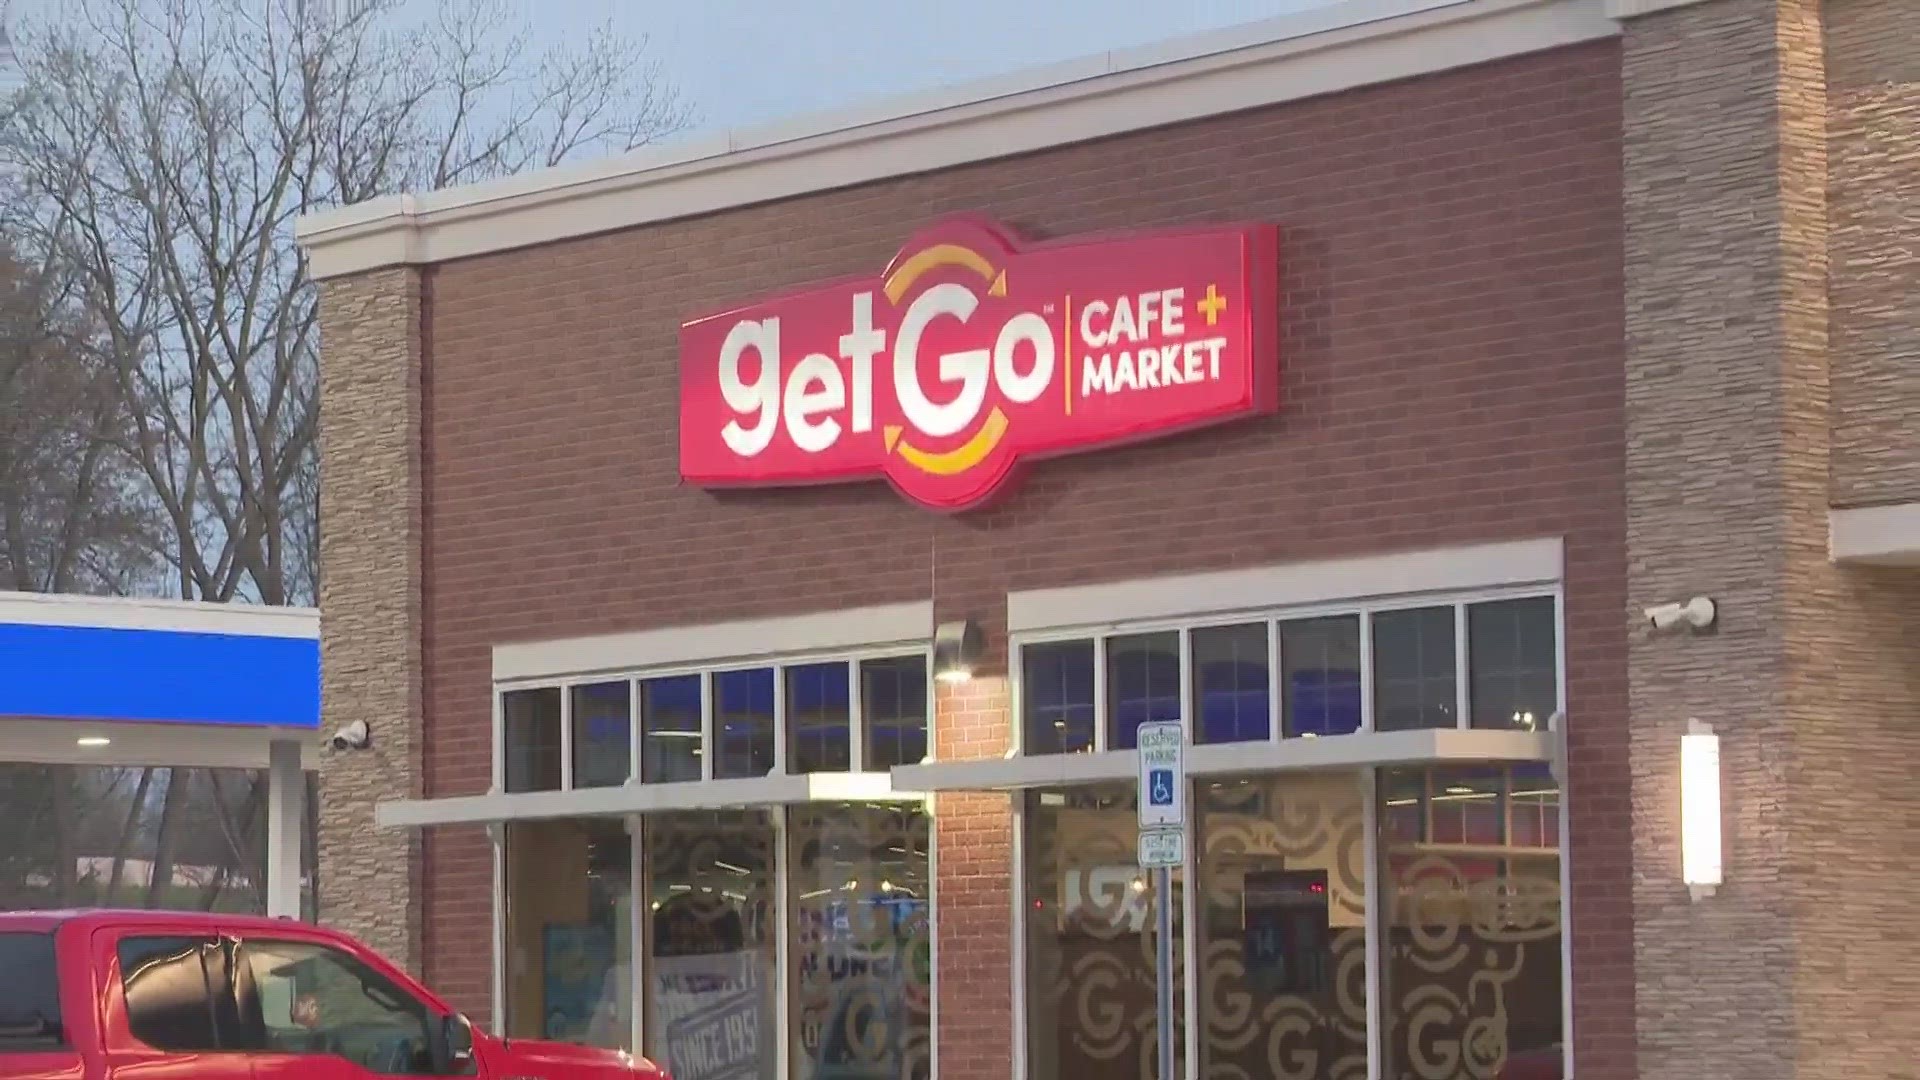 This GetGo location in Summit County sold the lucky Powerball lottery ticket that just hit the jackpot worth $252.6 million.